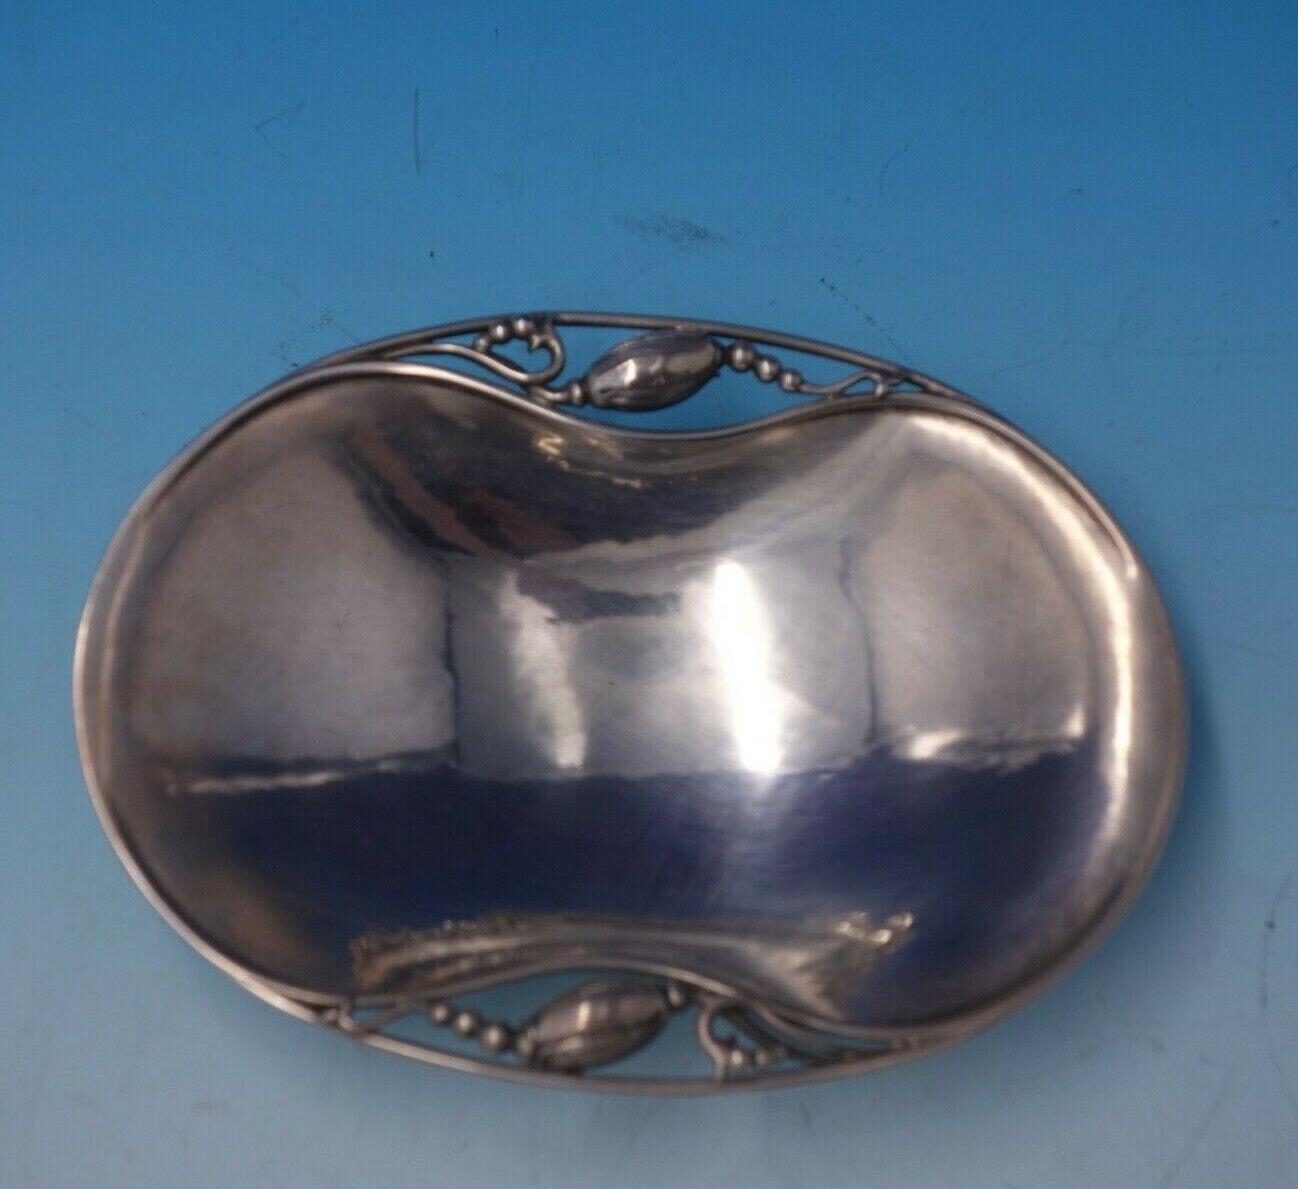 Blossom by Georg Jensen

Gorgeous Blossom by Georg Jensen sterling silver soap dished marked #2. This piece measures 7/8